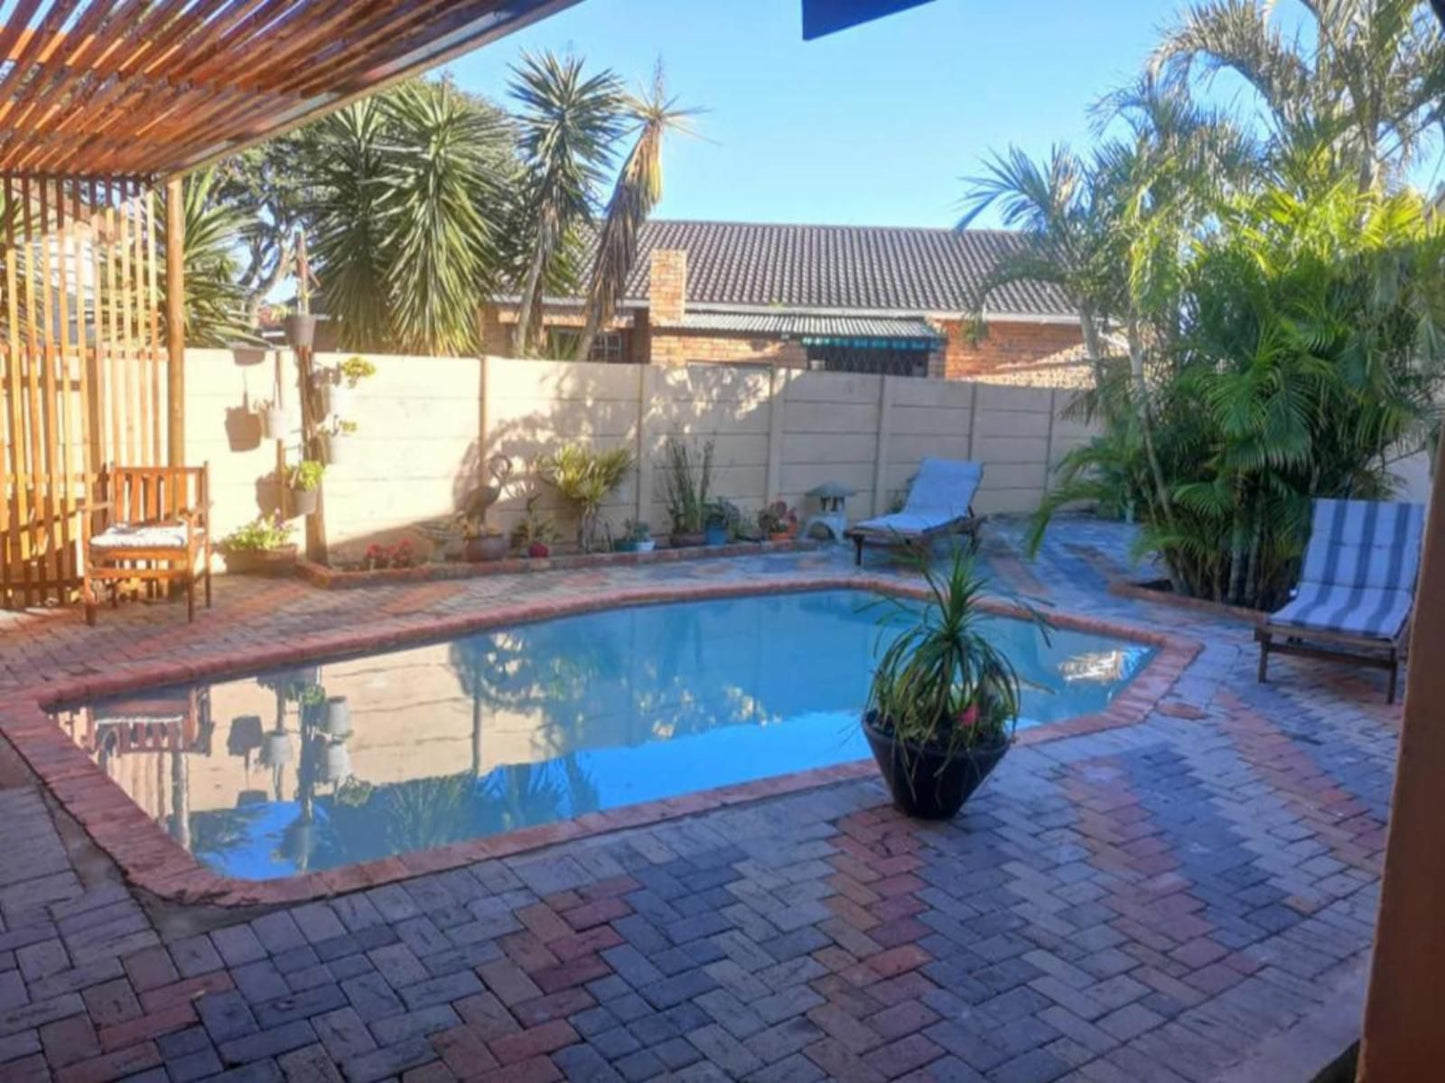 Su Casa Bandb Broadwood Port Elizabeth Eastern Cape South Africa Complementary Colors, Palm Tree, Plant, Nature, Wood, Garden, Swimming Pool